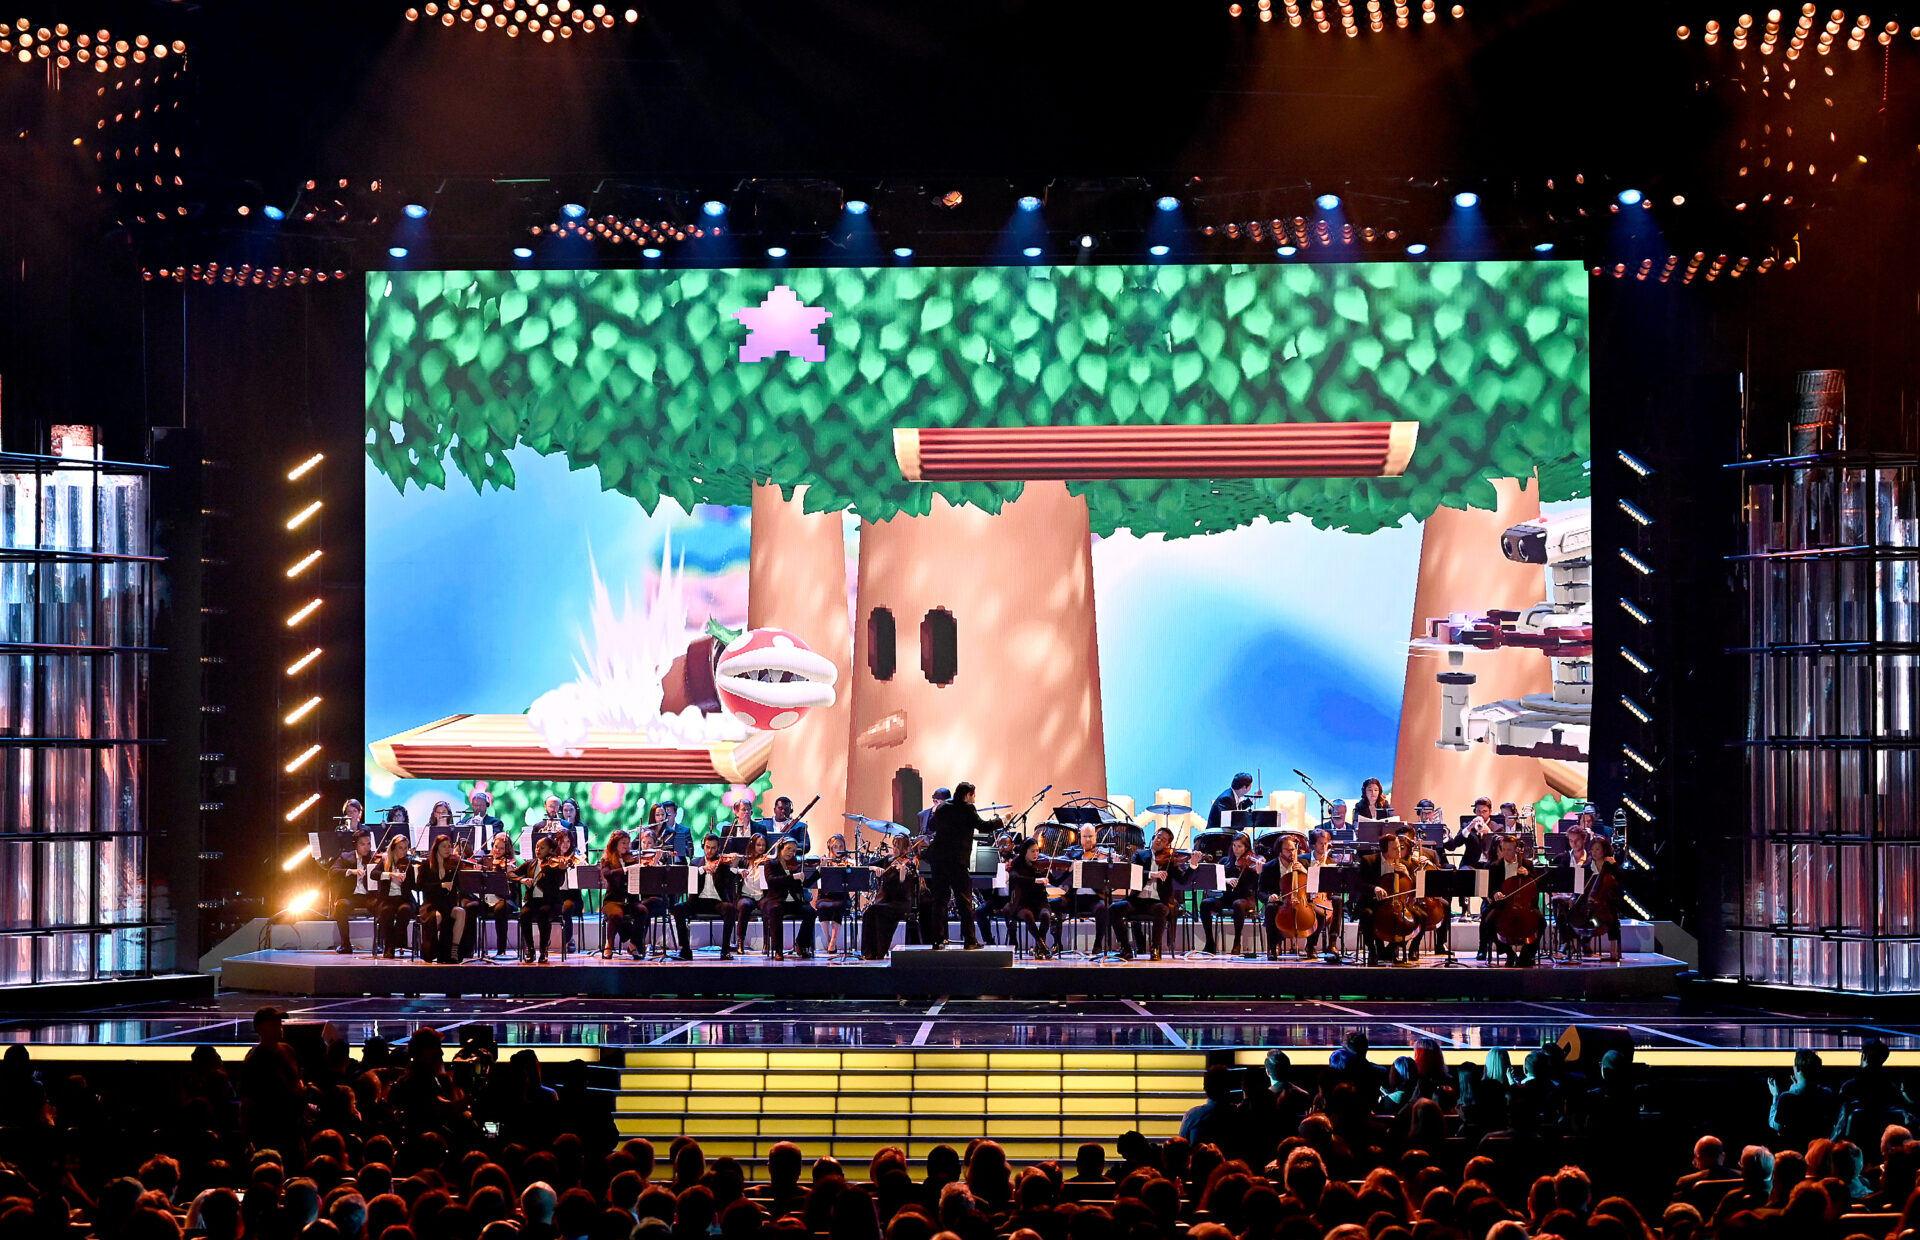 Geoff Keighley explains why his next big show is a video game music